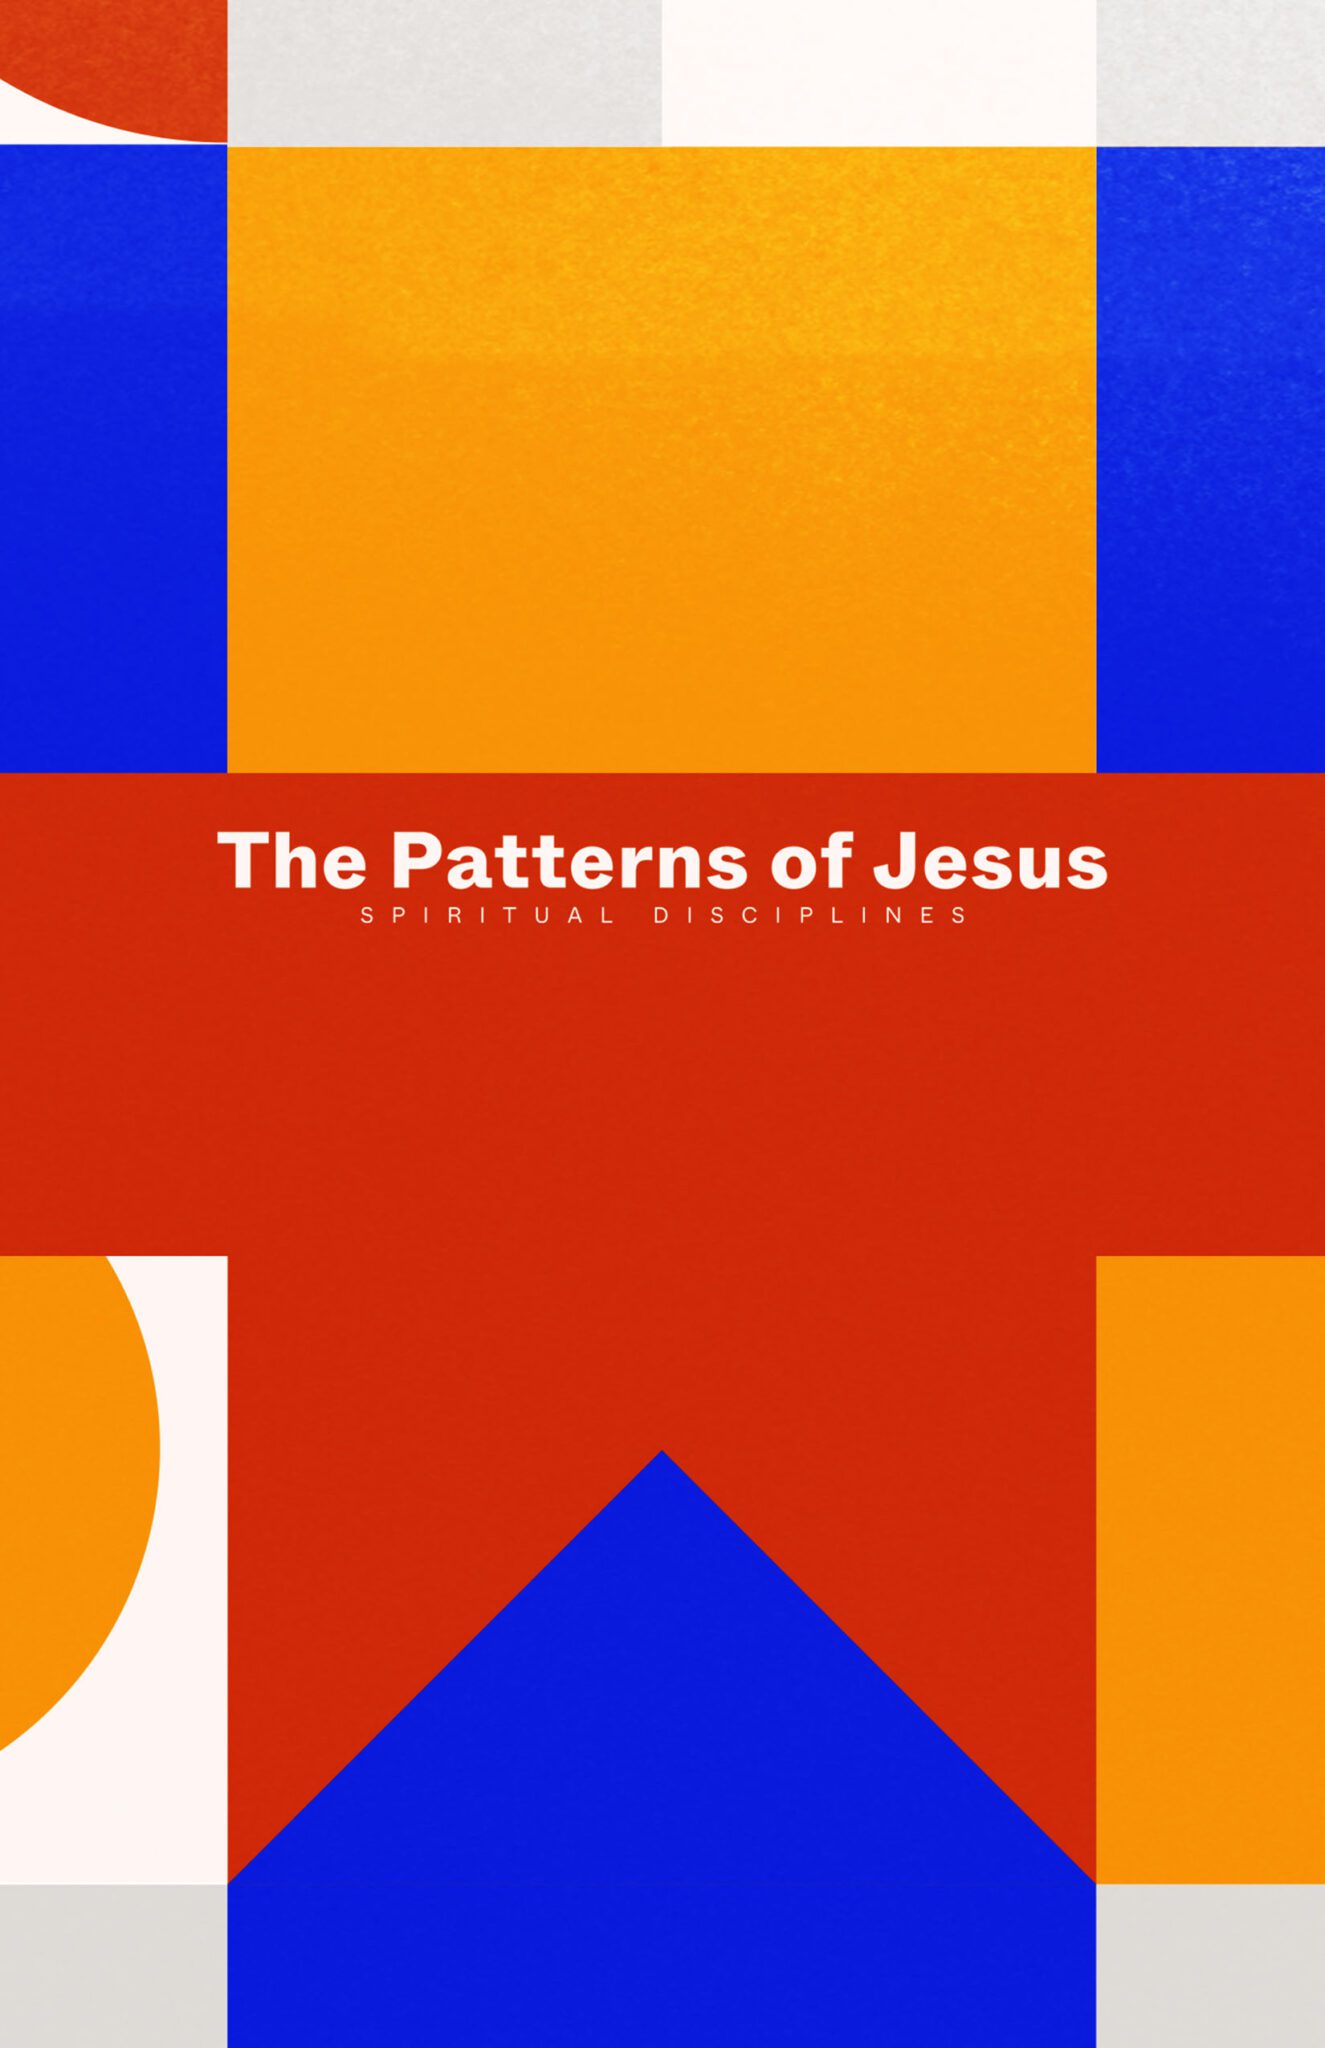 The Patterns of Jesus: Solitude